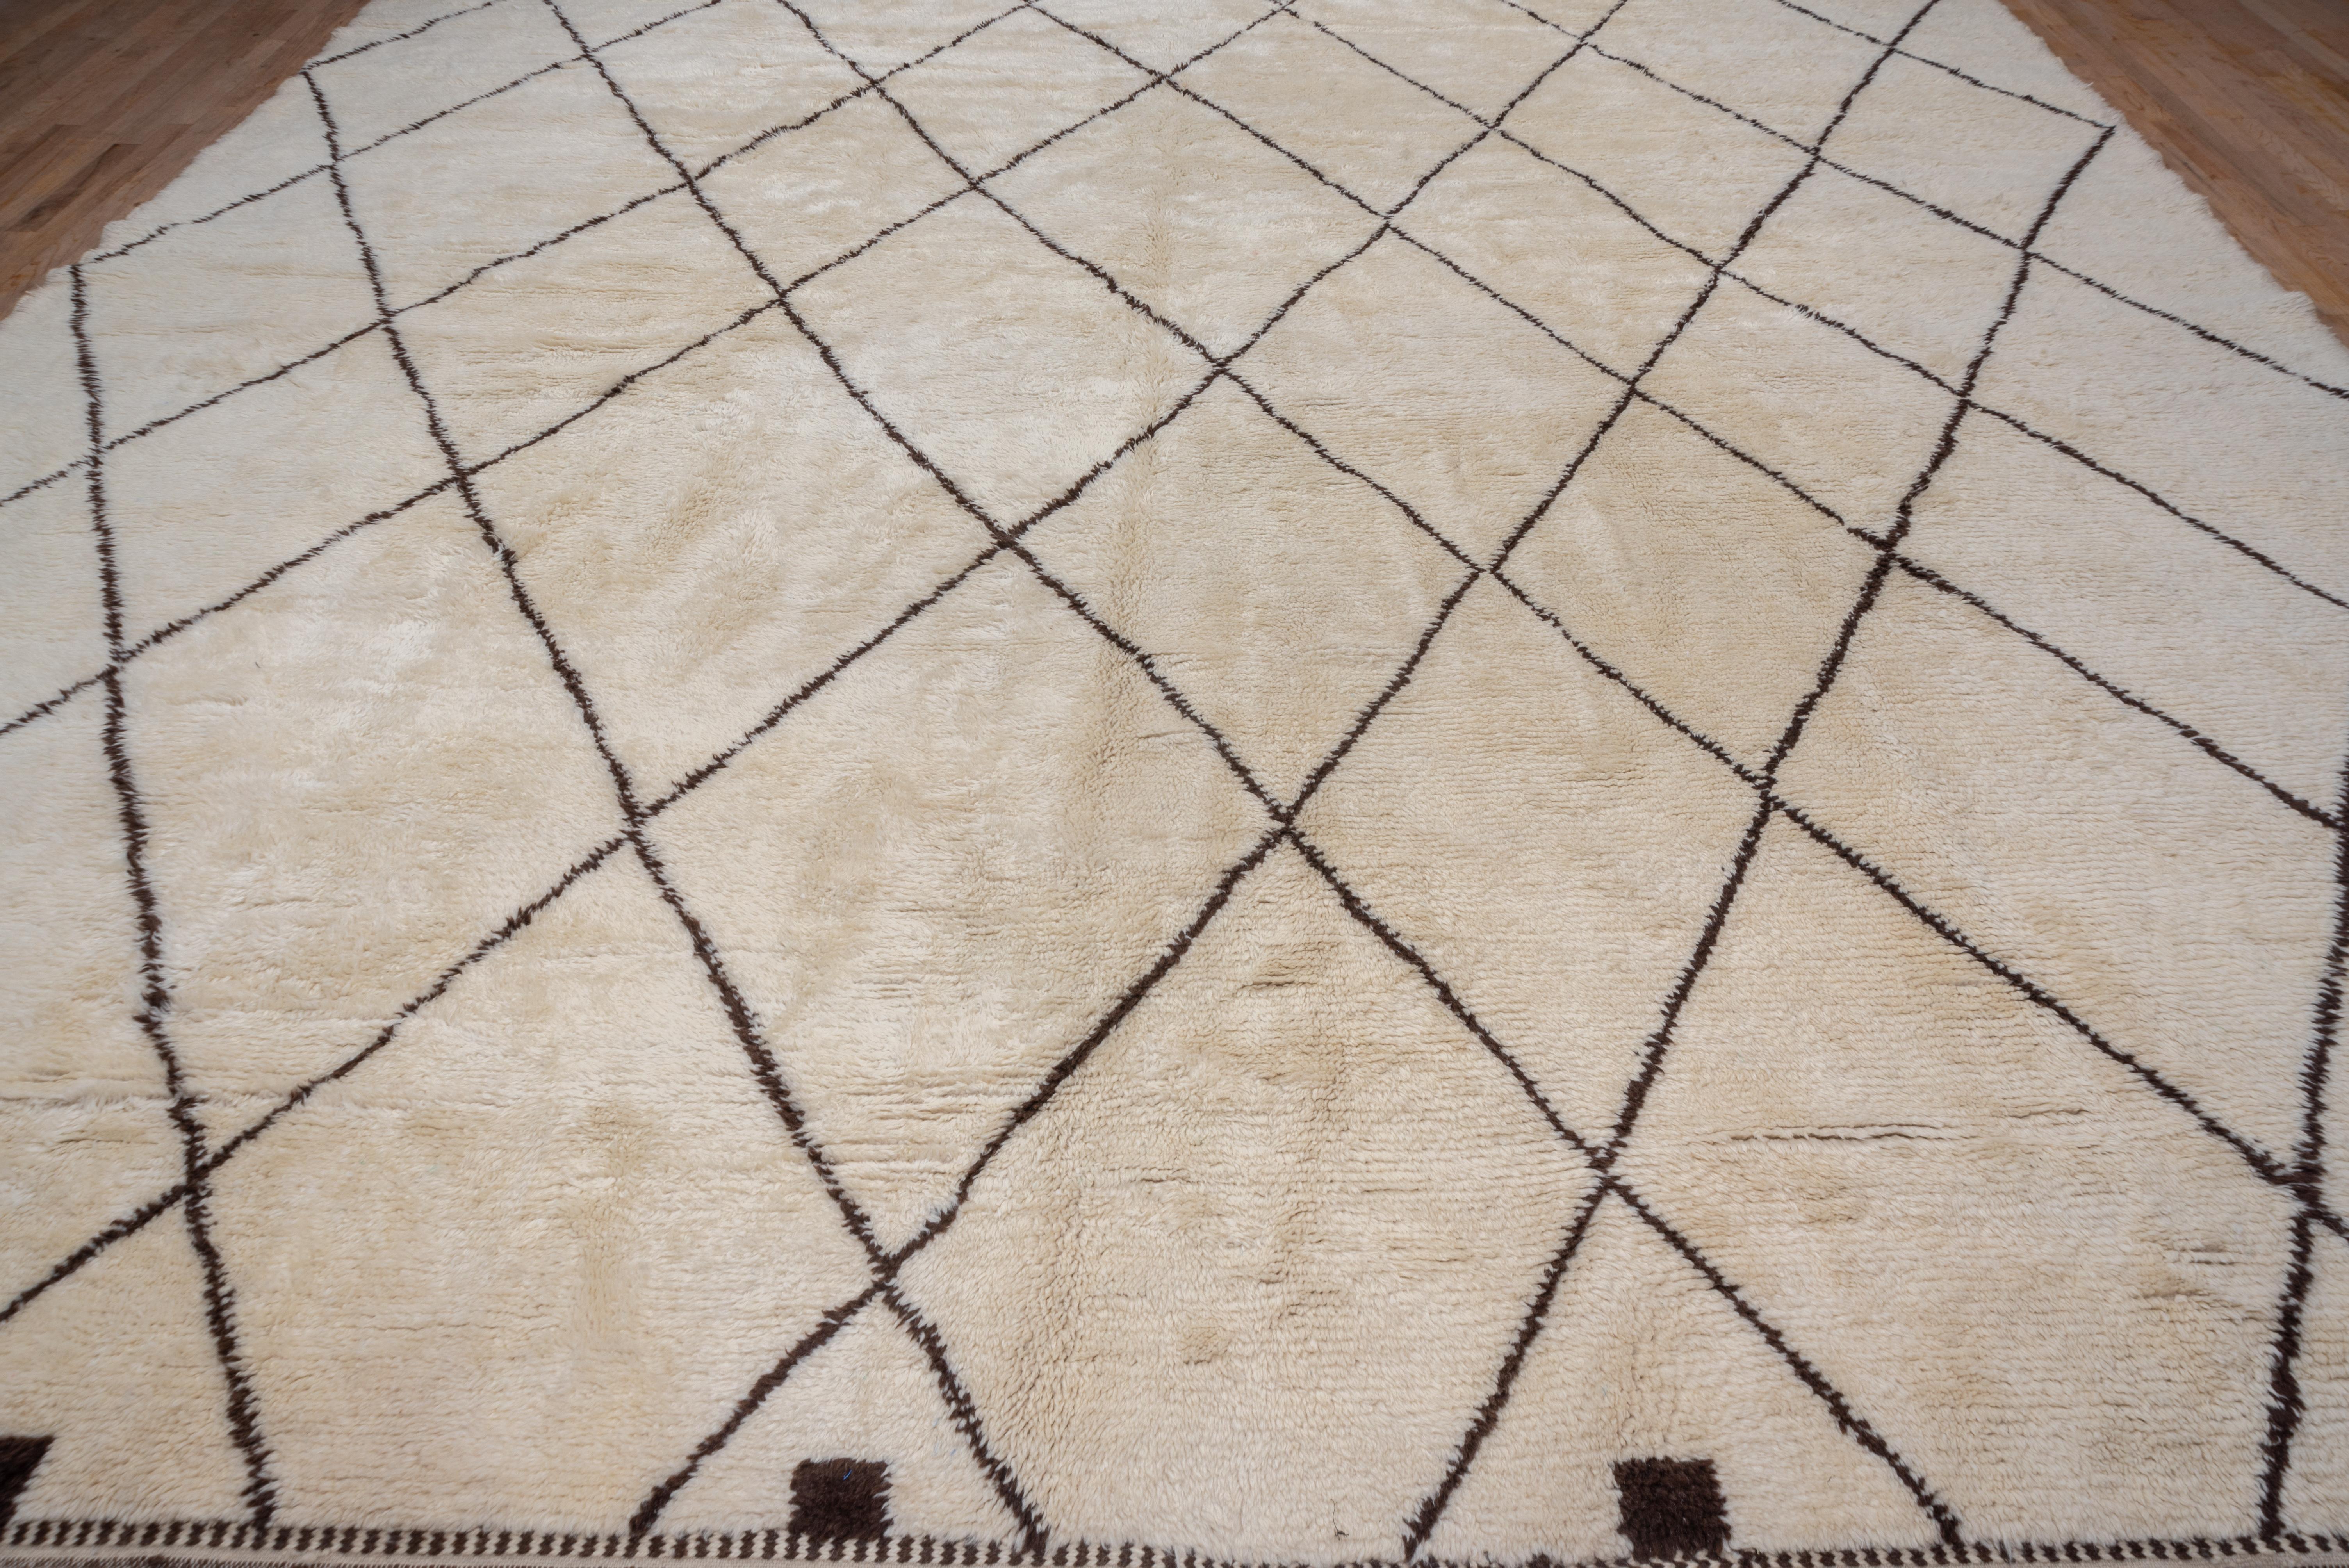 In the tribal Beni Ourain style, this high pile carpet features a slightly irregular tall lozenge, dark brown lattice on the sand ground. Small squares decorate the ends. Timeless and easy to place.